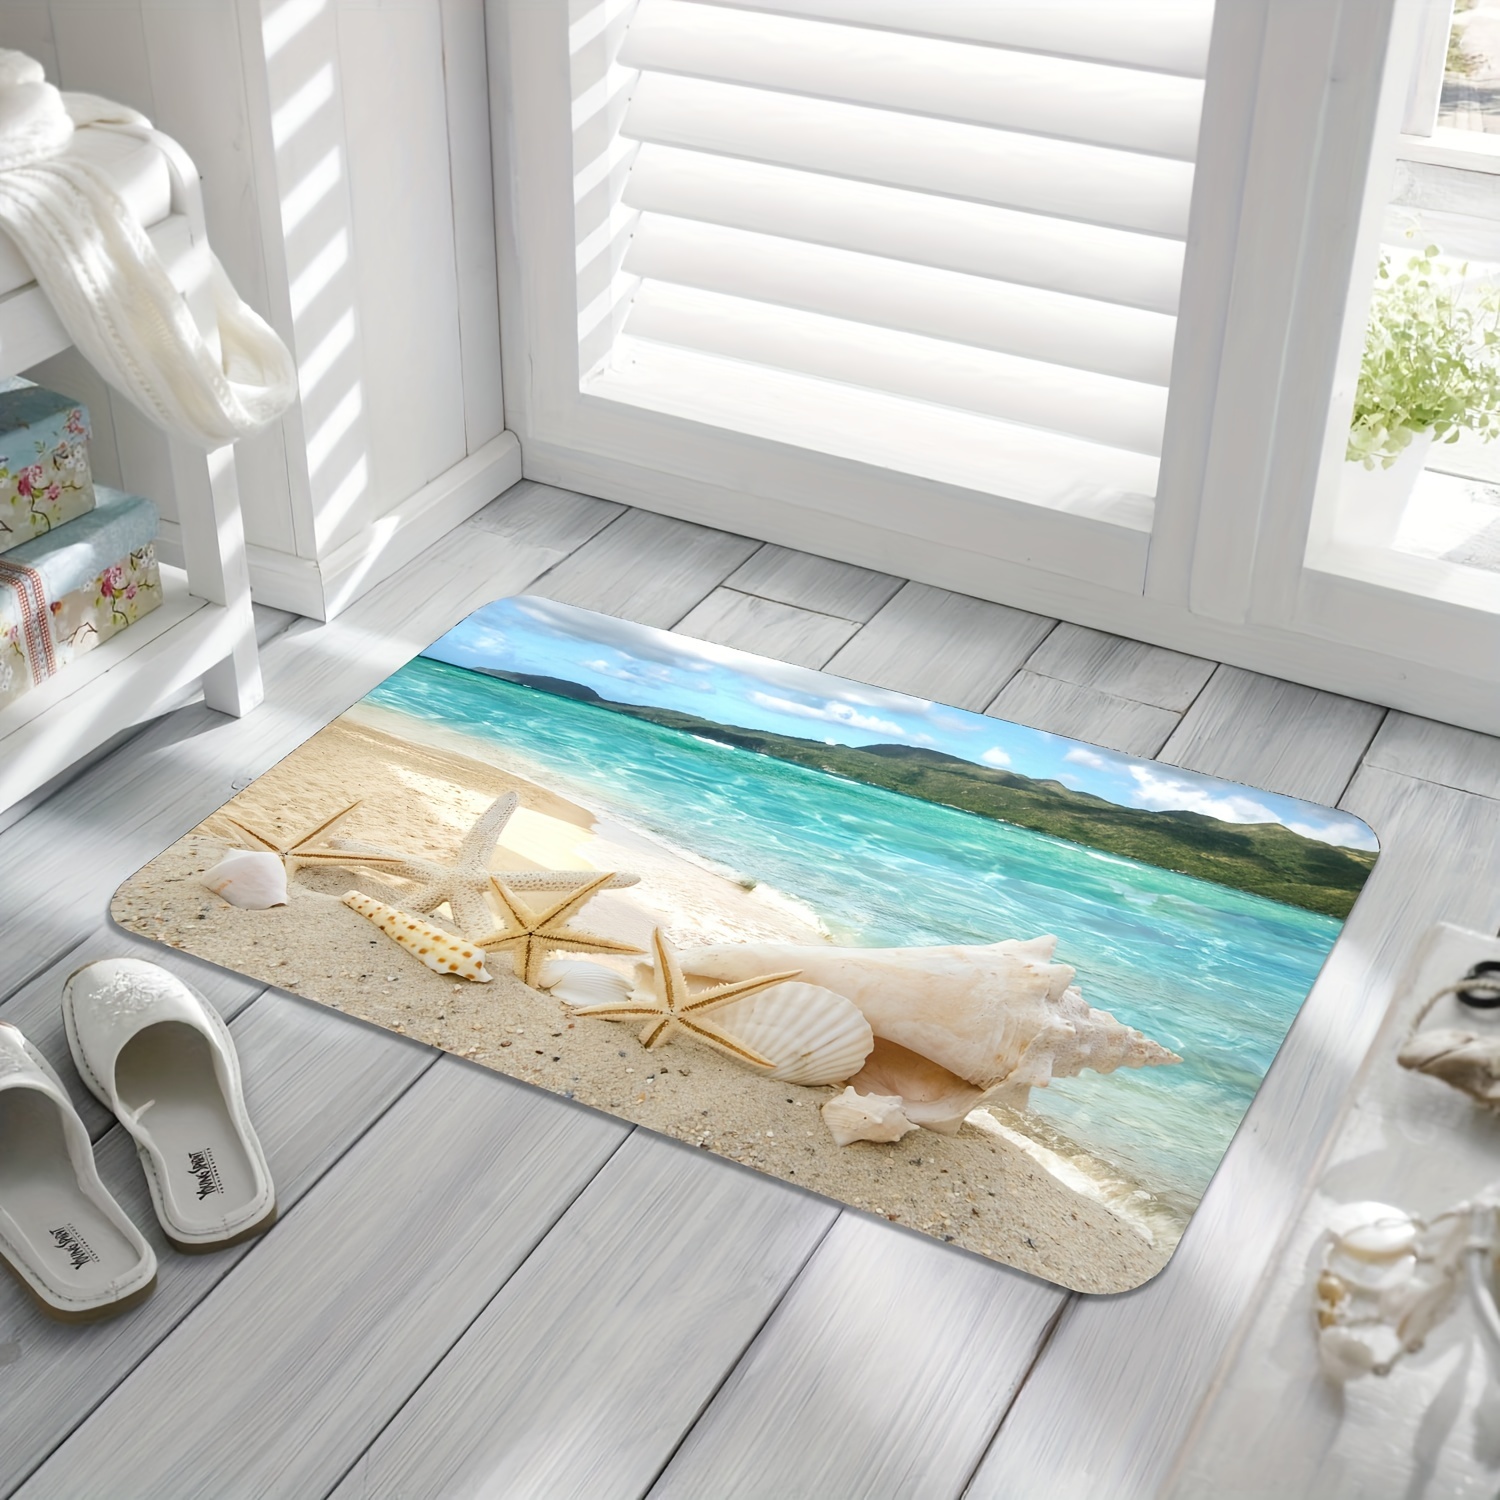 Non Slip Bath Rugs Sponge Foam for Bathroom,Durable Flannel Mat Bright 3D  Print Rug,Clearance MatS for Forlaundry Room and Kitchen, Conch Beach  Themed